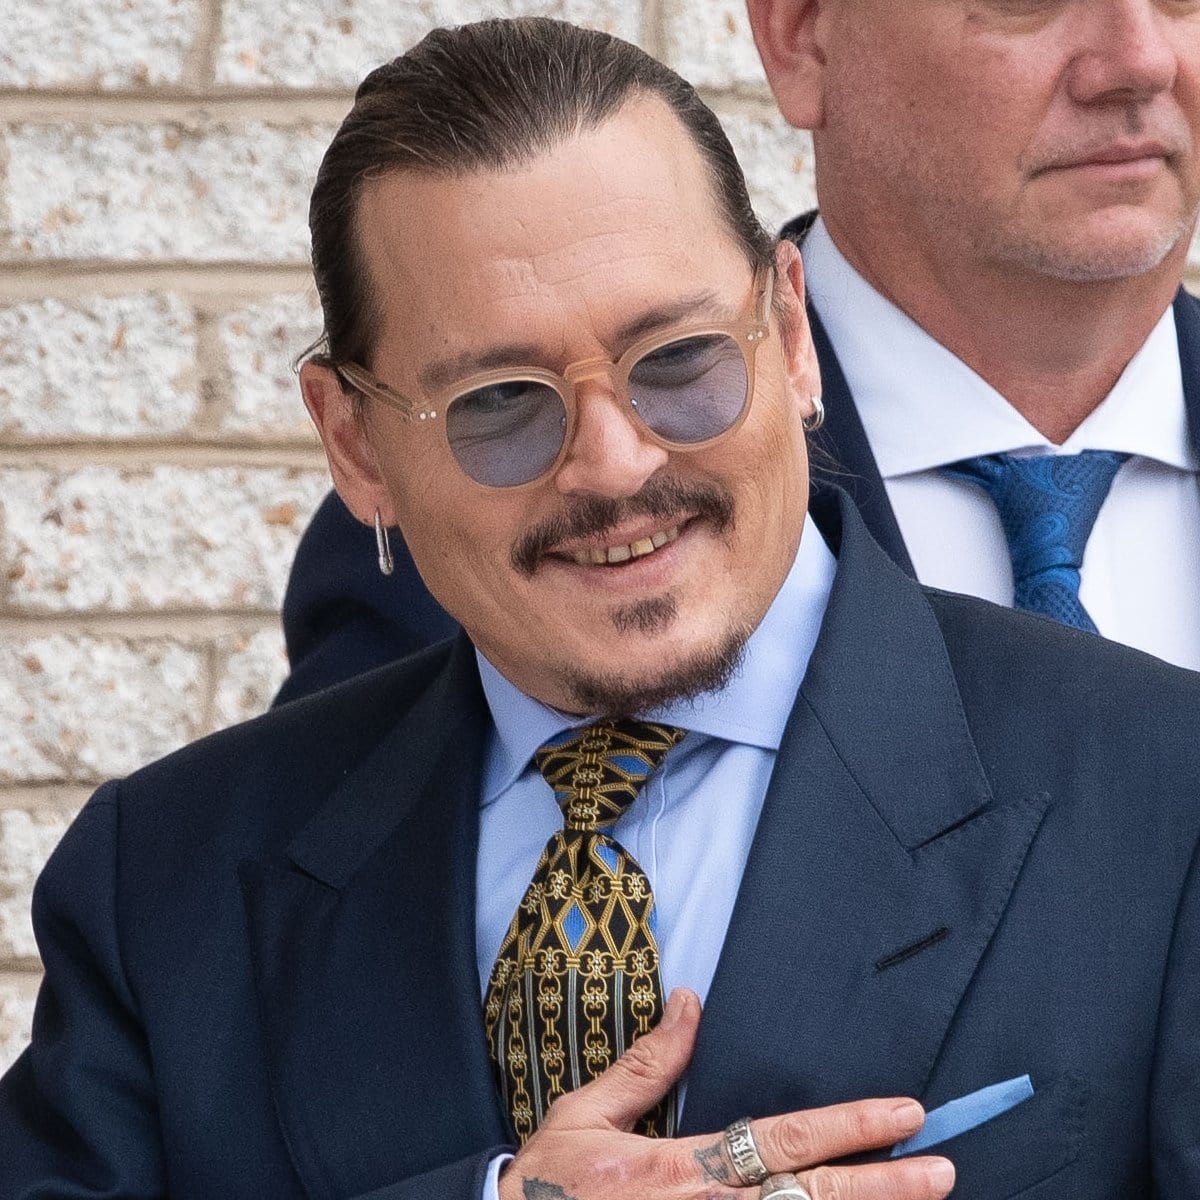 There has been much speculation about Johnny Depp